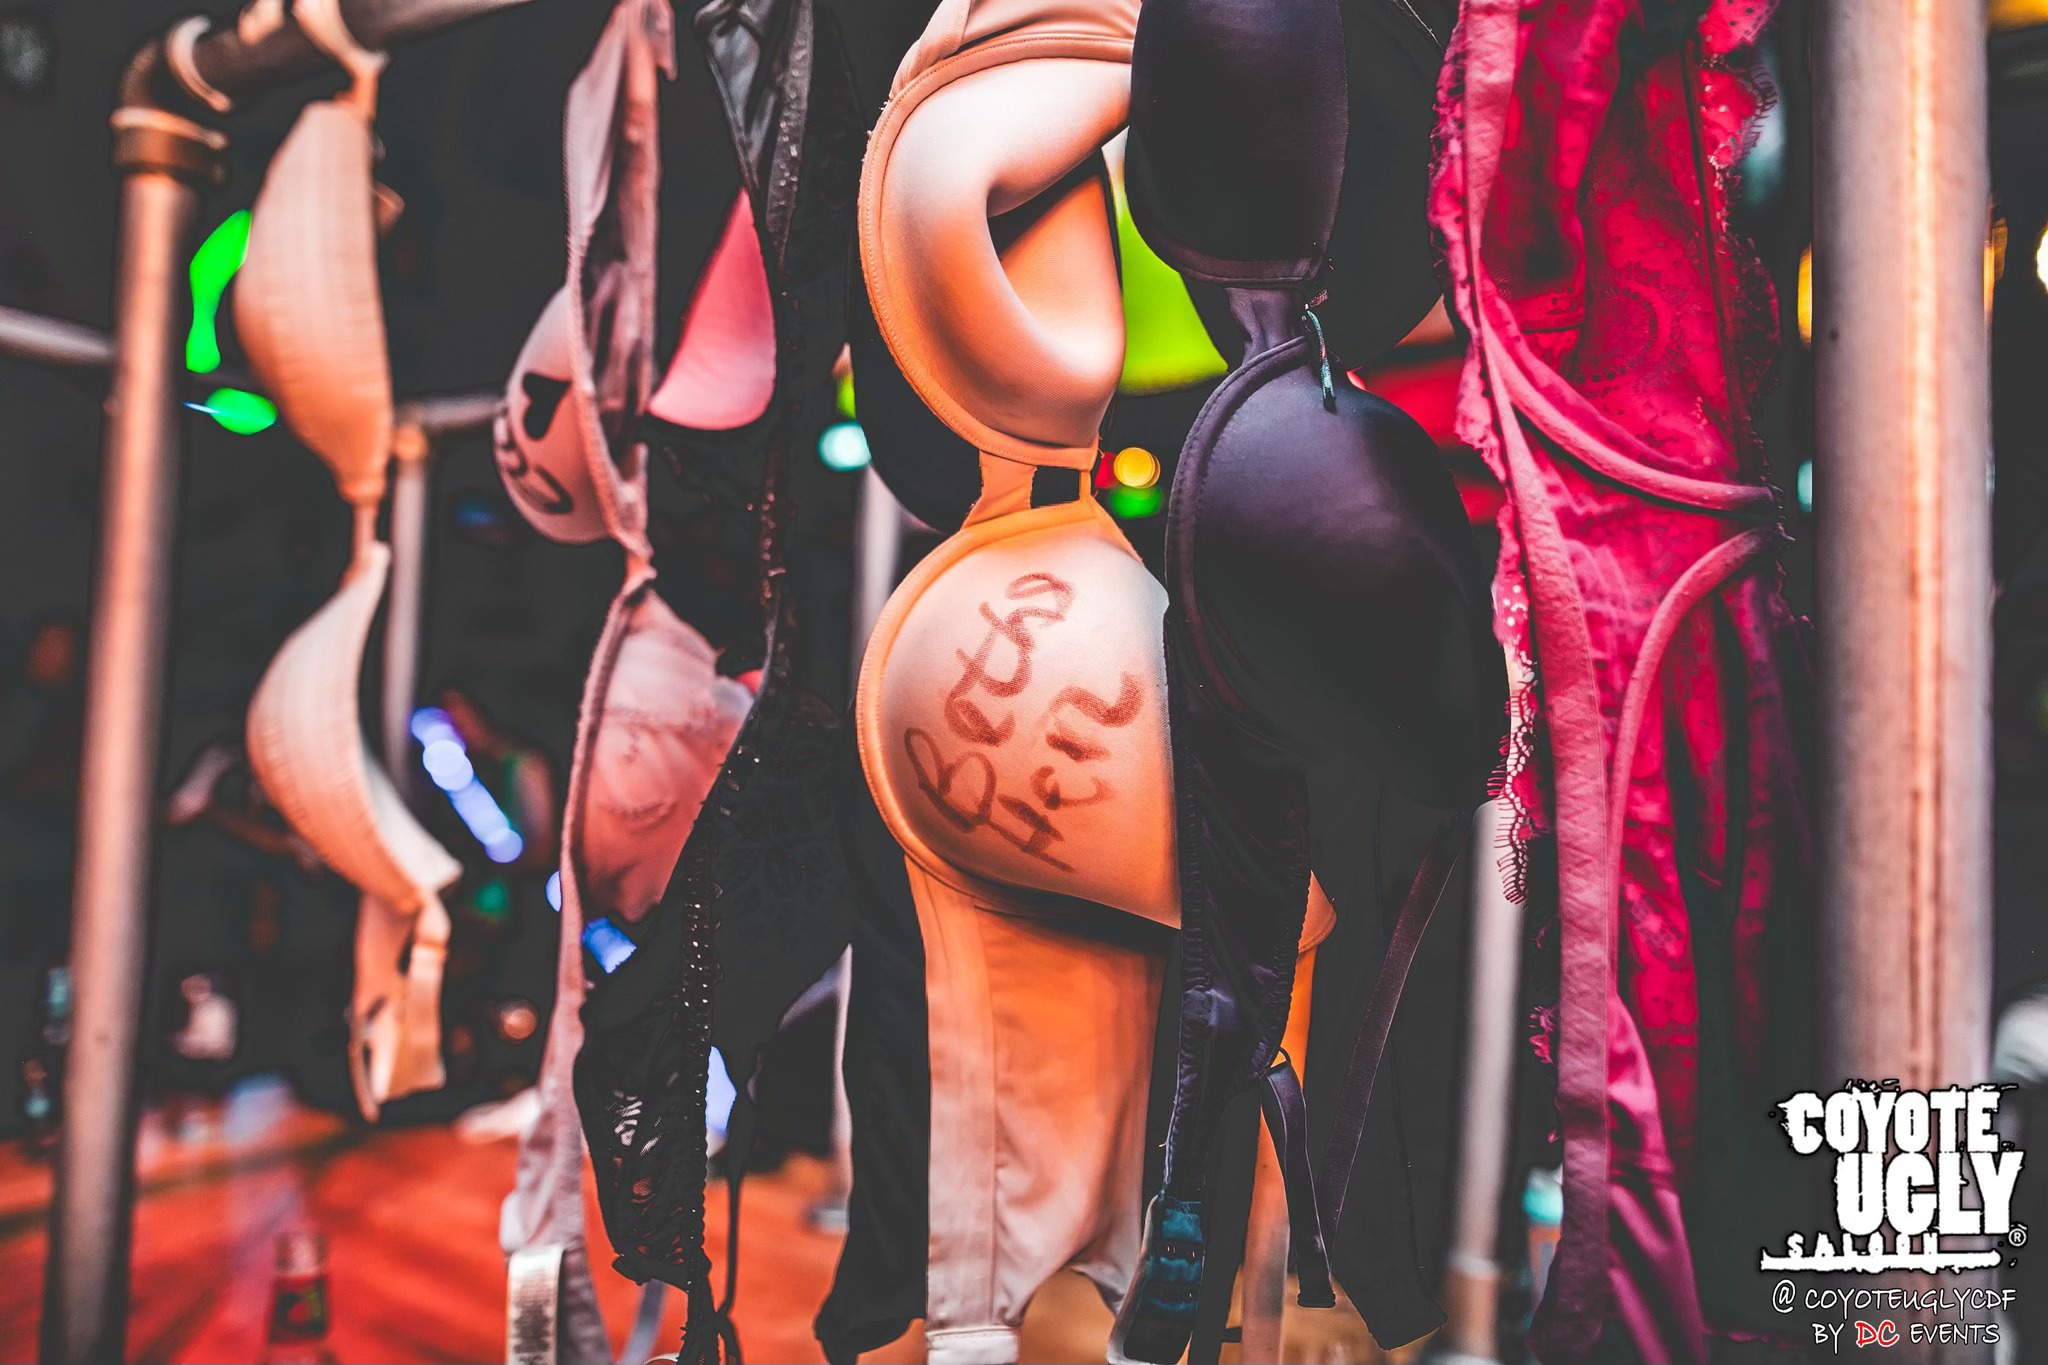 Bras at Coyote Ugly